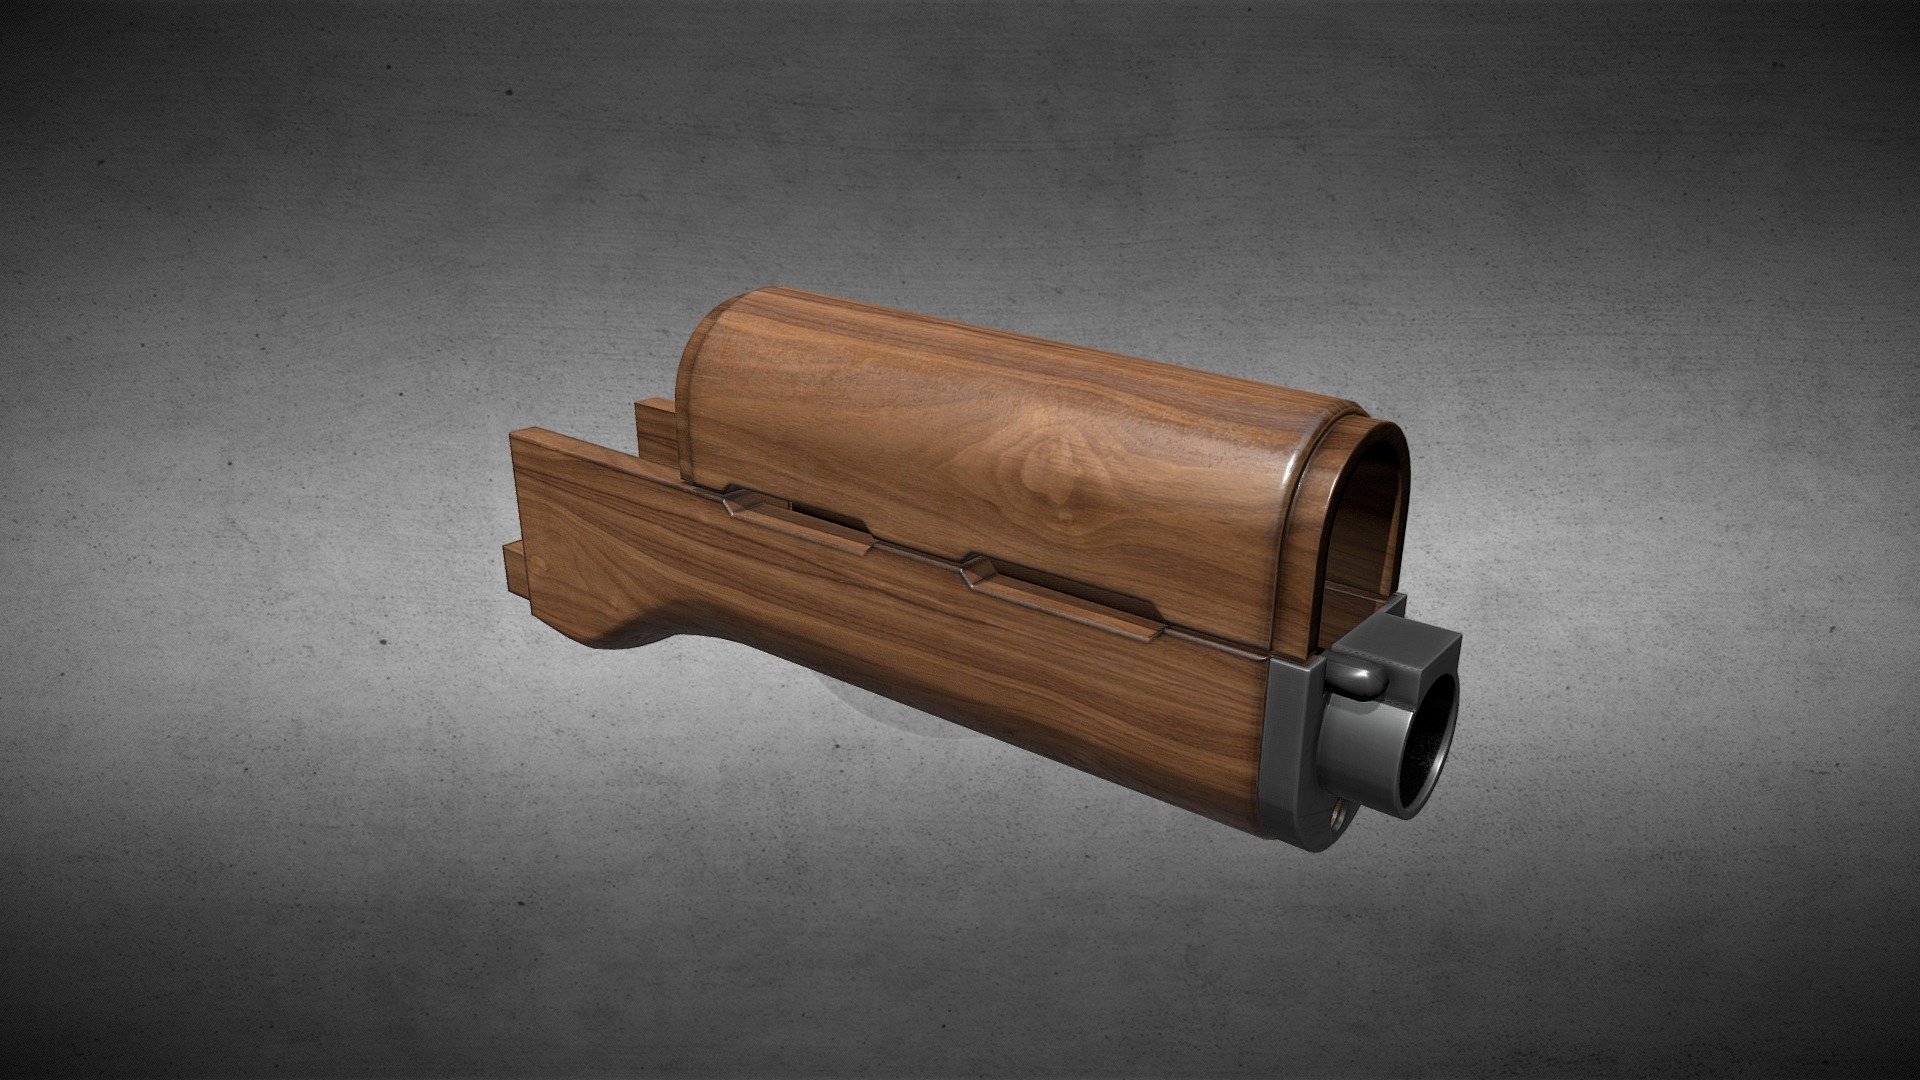 This Asset is part of

[MWS] Modular Weapon System

targeted to create semi-detailed game ready Weapon Models based on popular Weapon Platforms with a variety of changeable Parts for enhanced Gunsmith Features in Games.



AK Handguard &ldquo;Walnut